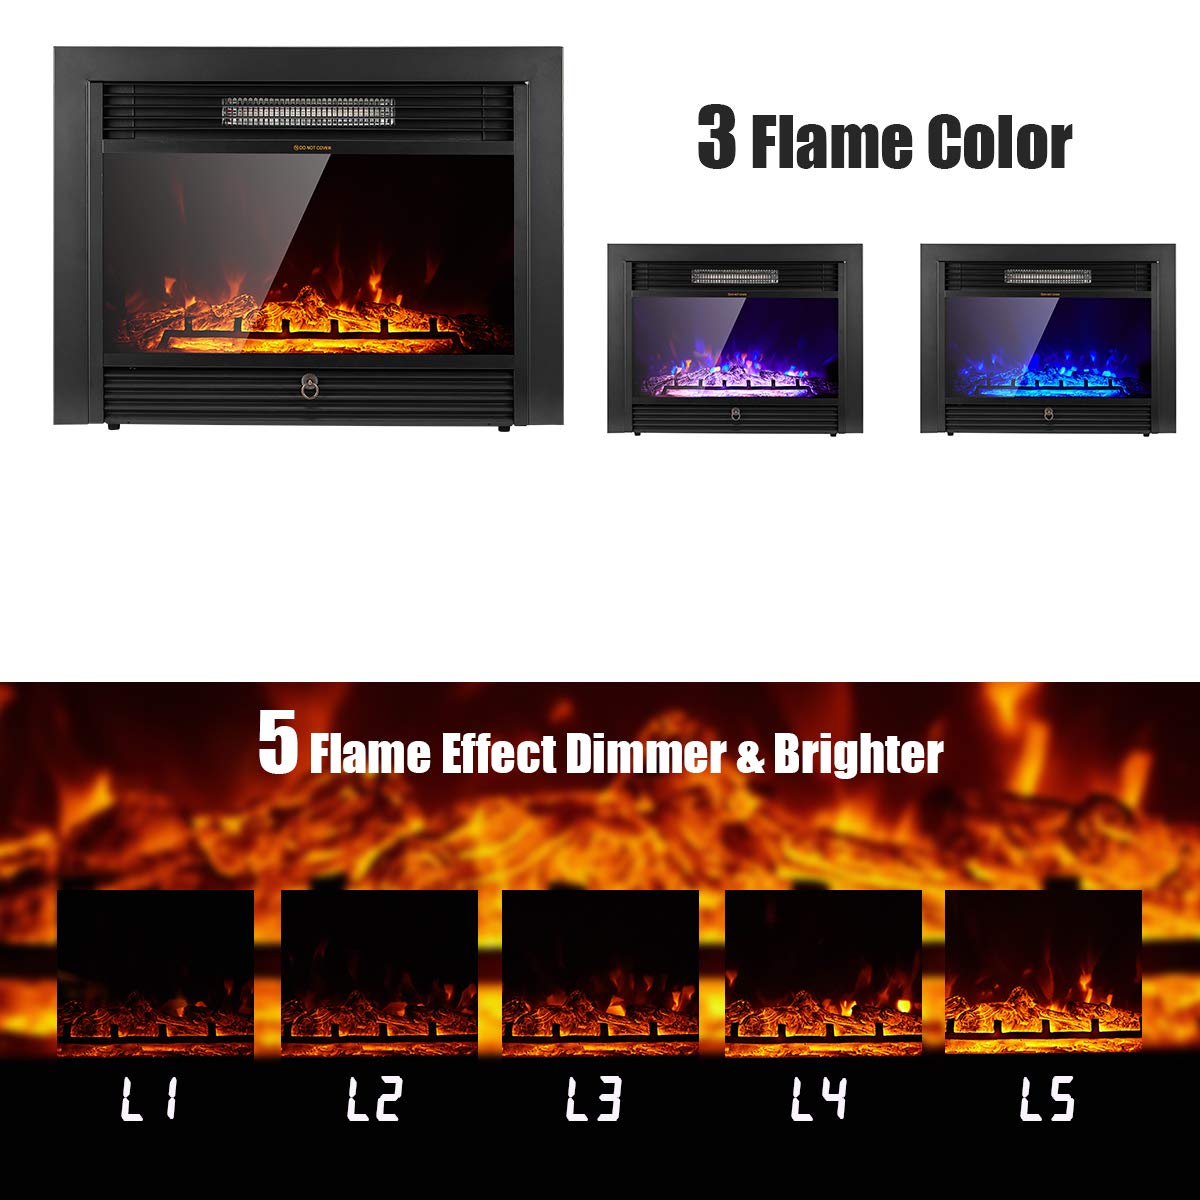 YODOLLA 28.5" Electric Fireplace Insert with 3 Color Flames, Fireplace Heater with Remote Control and Timer, 750w-1500W,Classic 